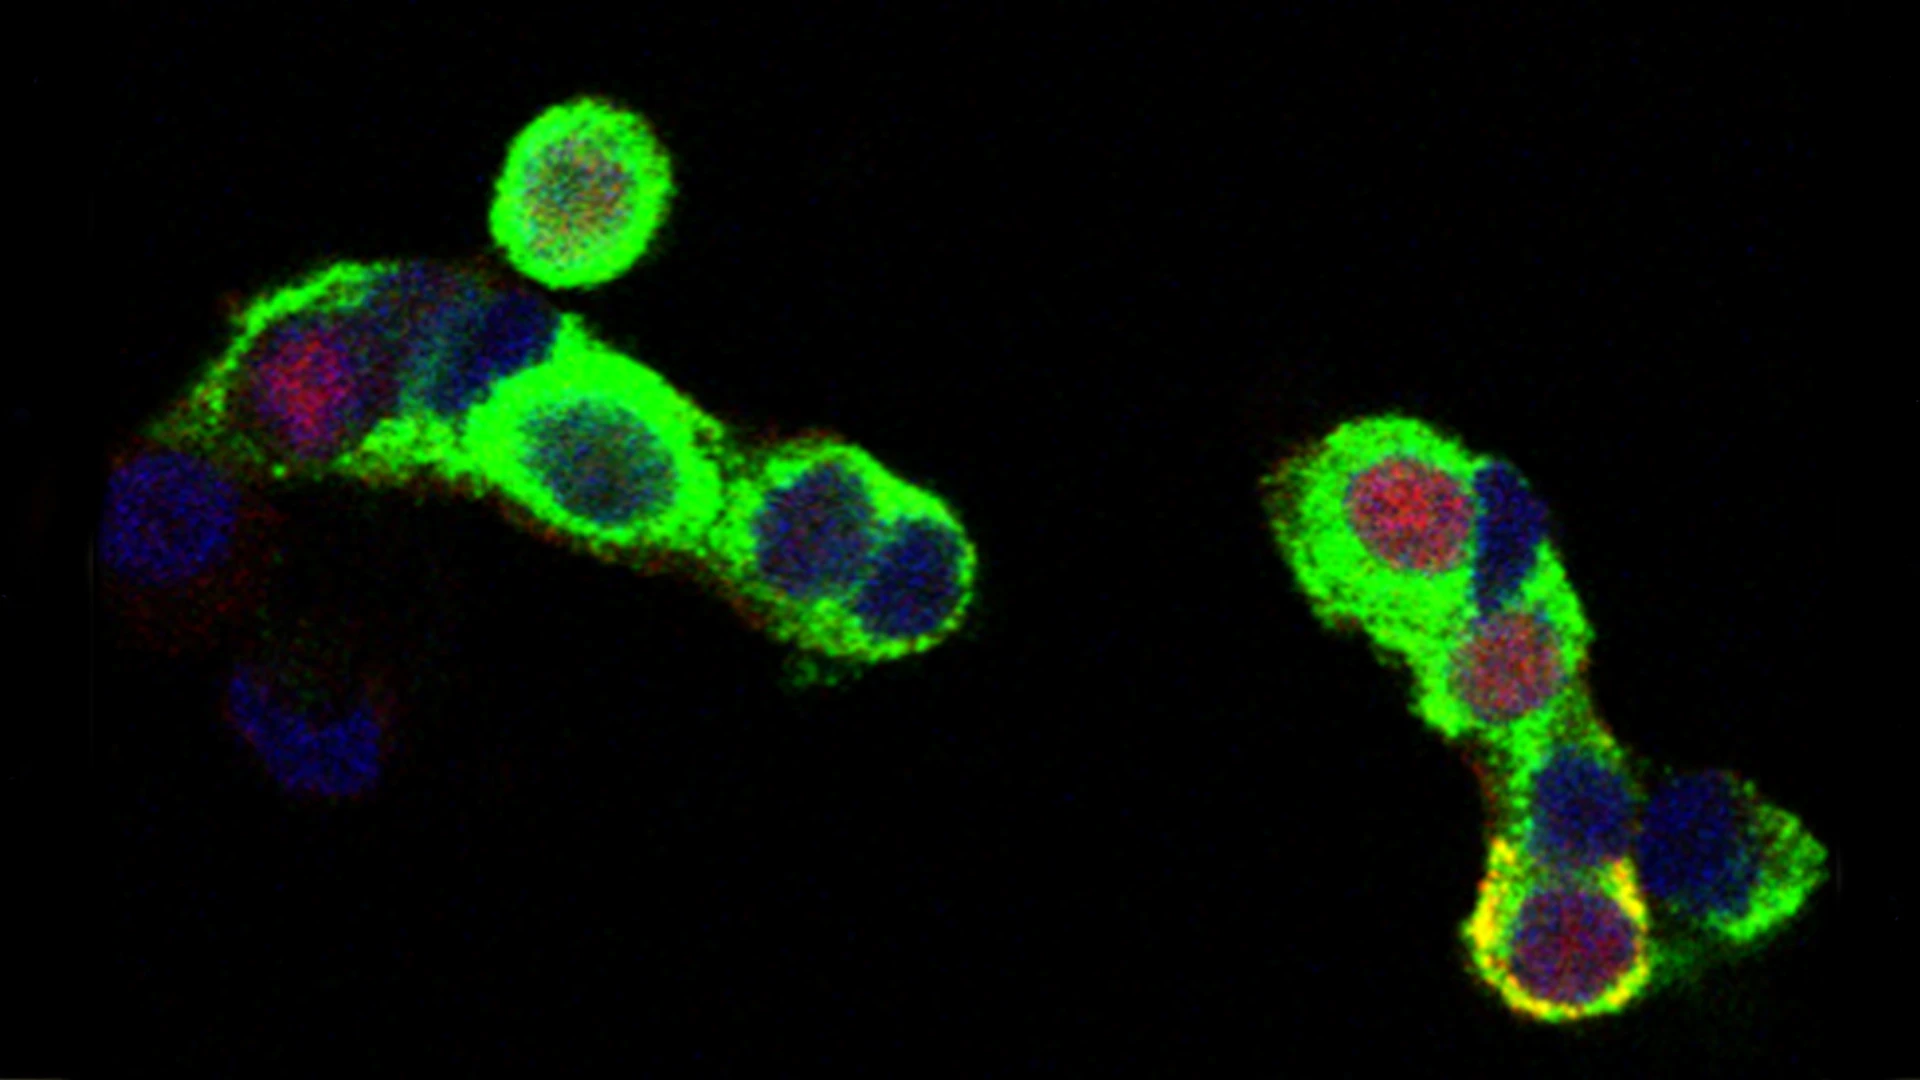 Immunostaining shows expression of p57KIP2 (red) in approximately 50 percent of human beta cells (green).